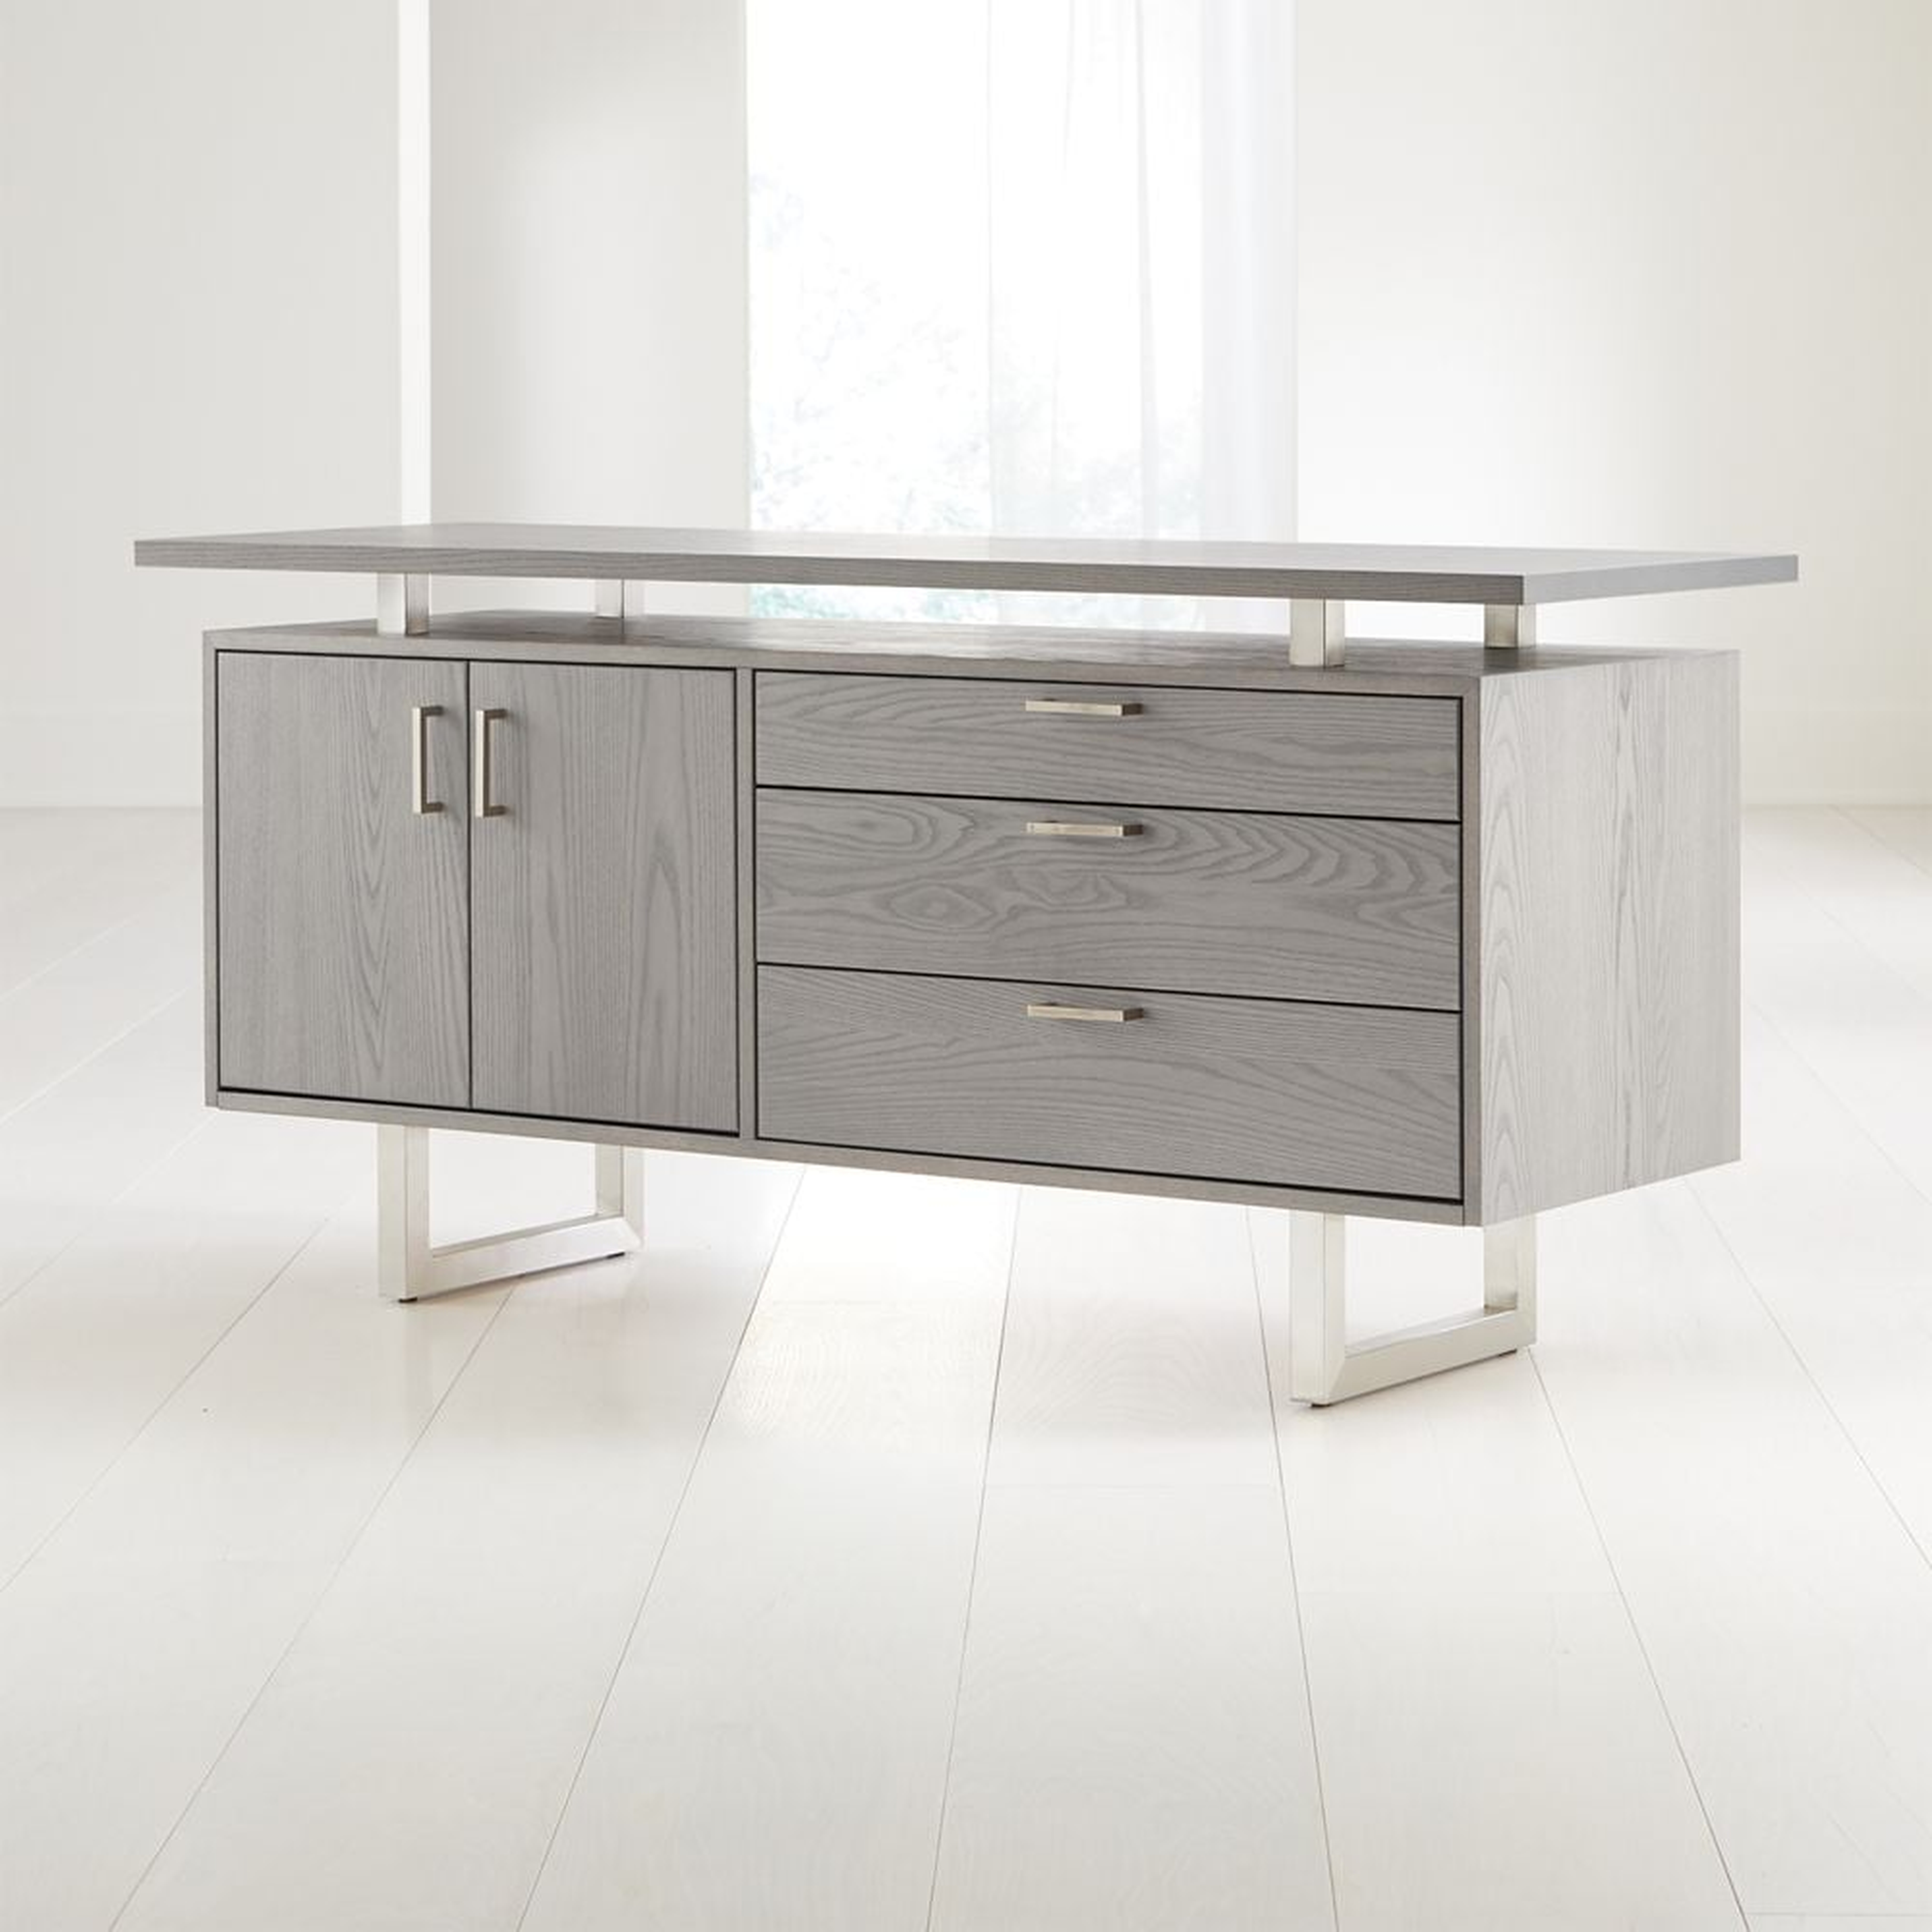 Clybourn Dove Credenza - Crate and Barrel